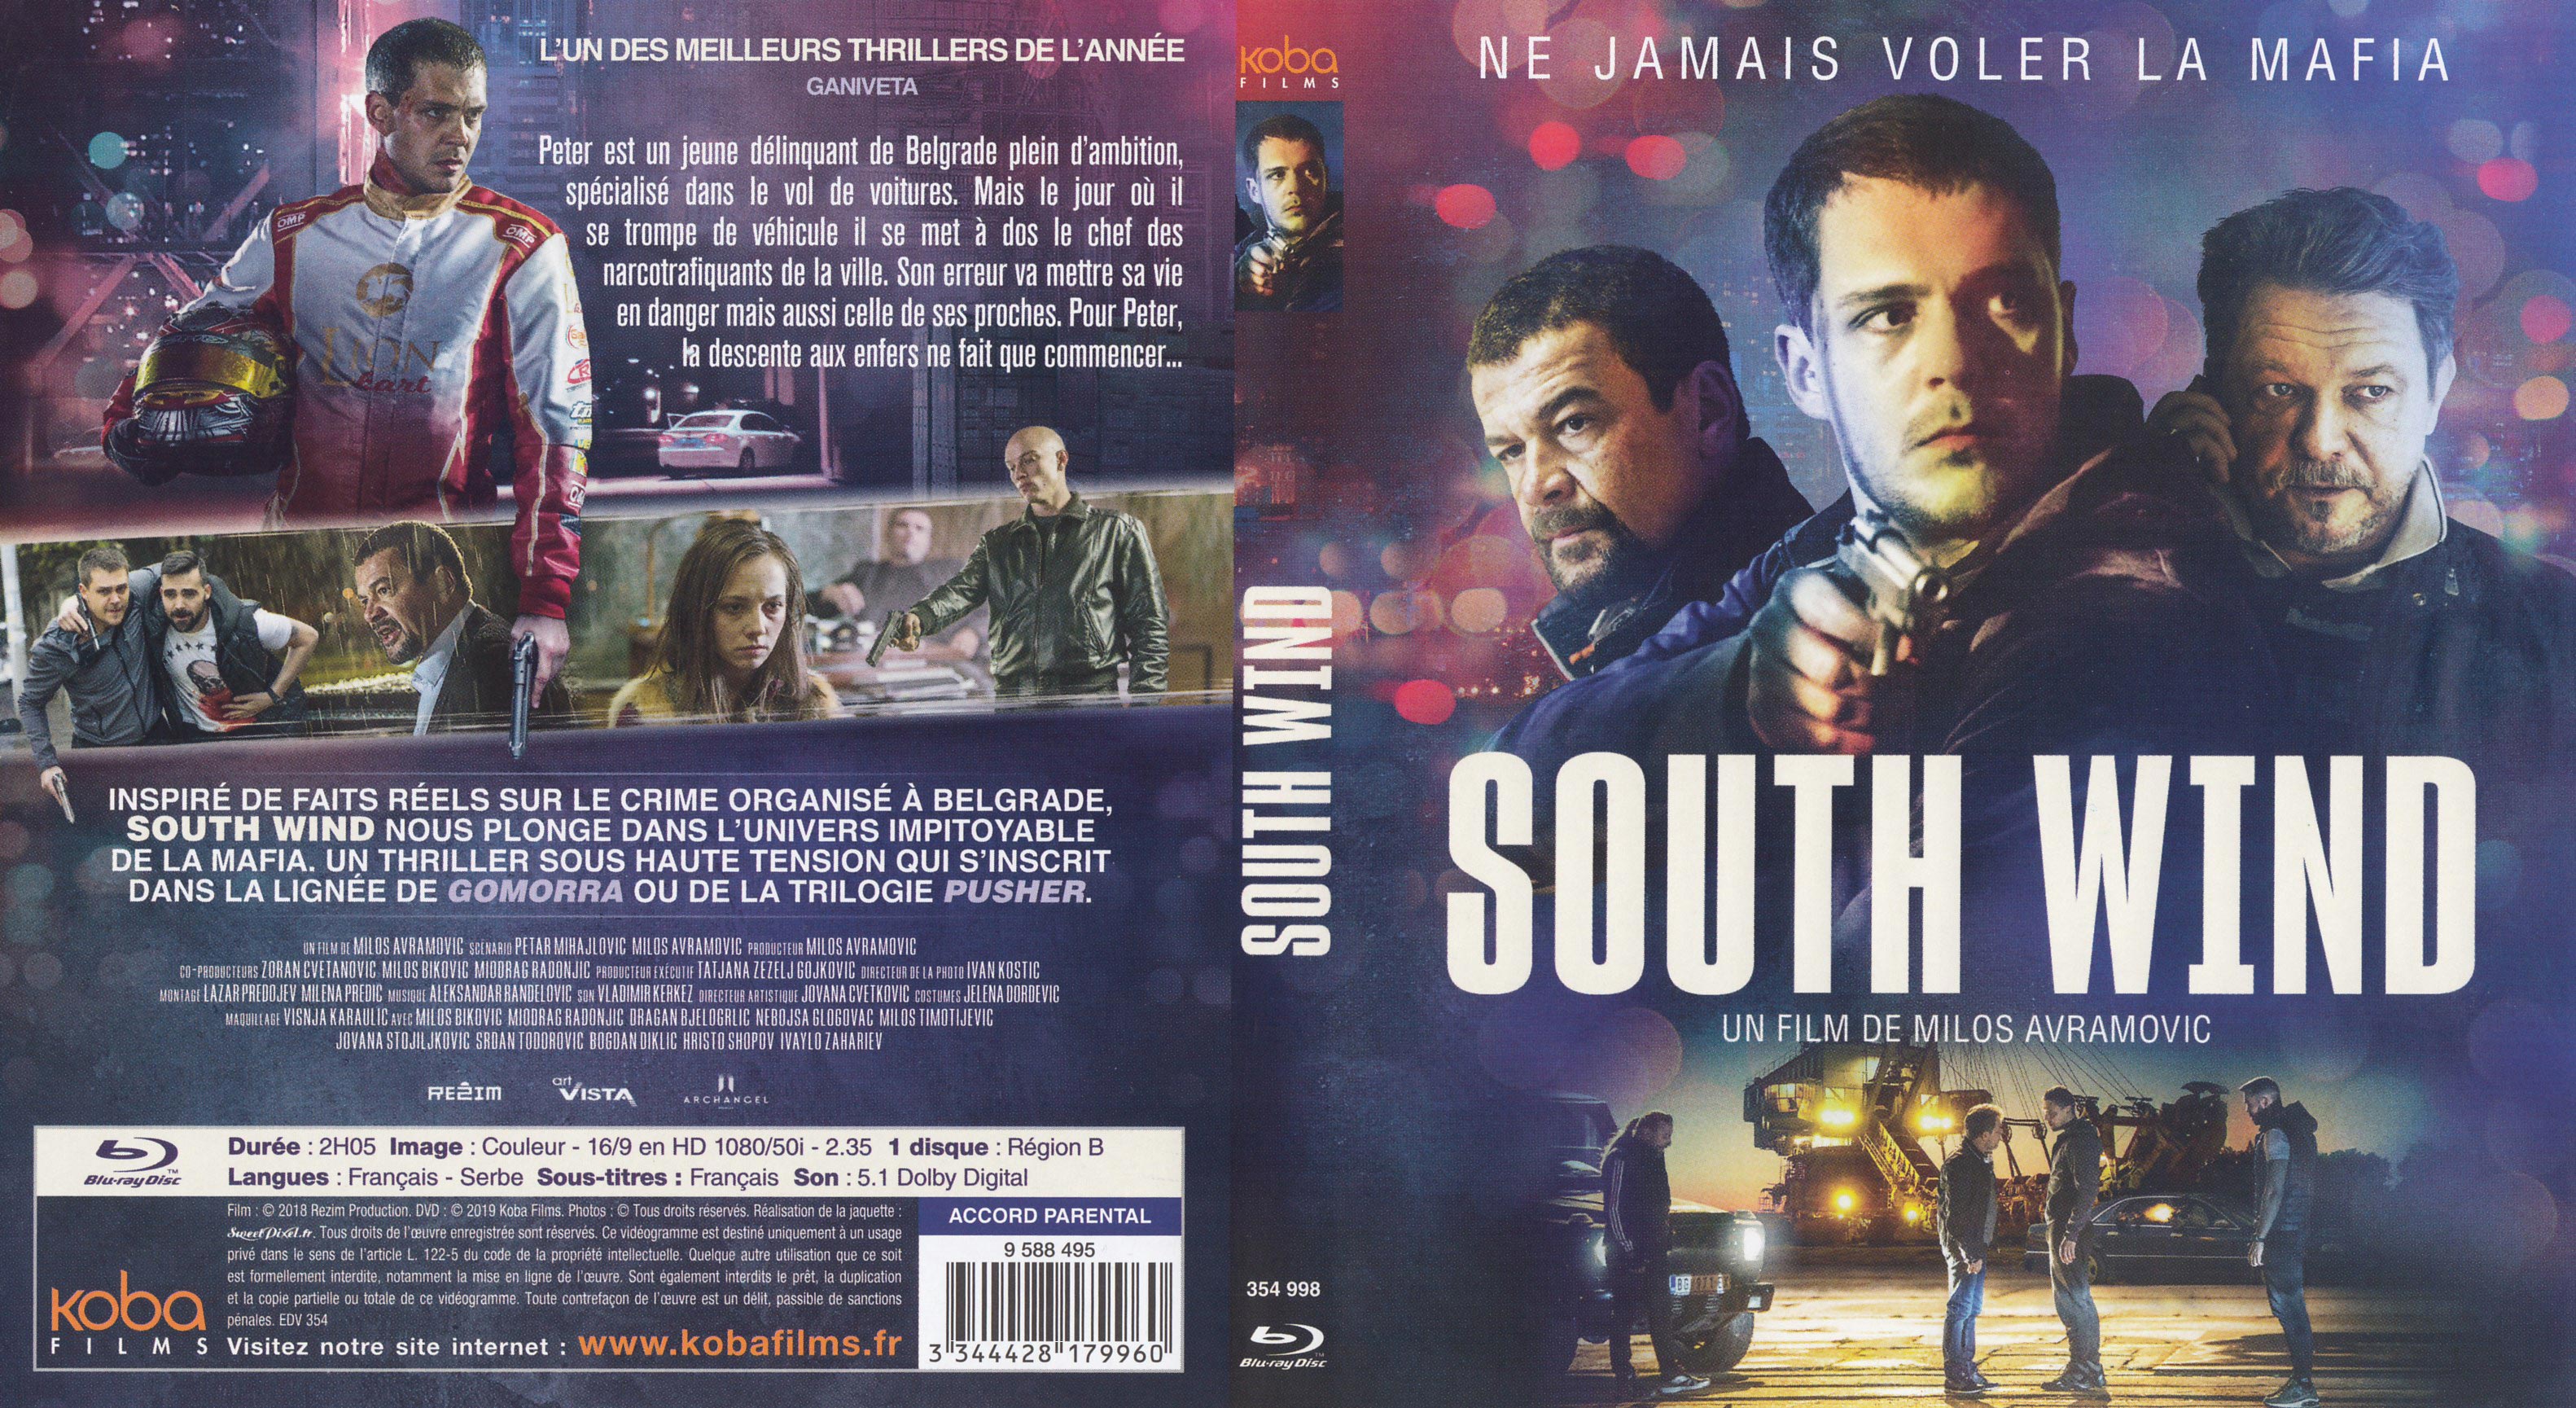 Jaquette DVD South wind (BLU-RAY)